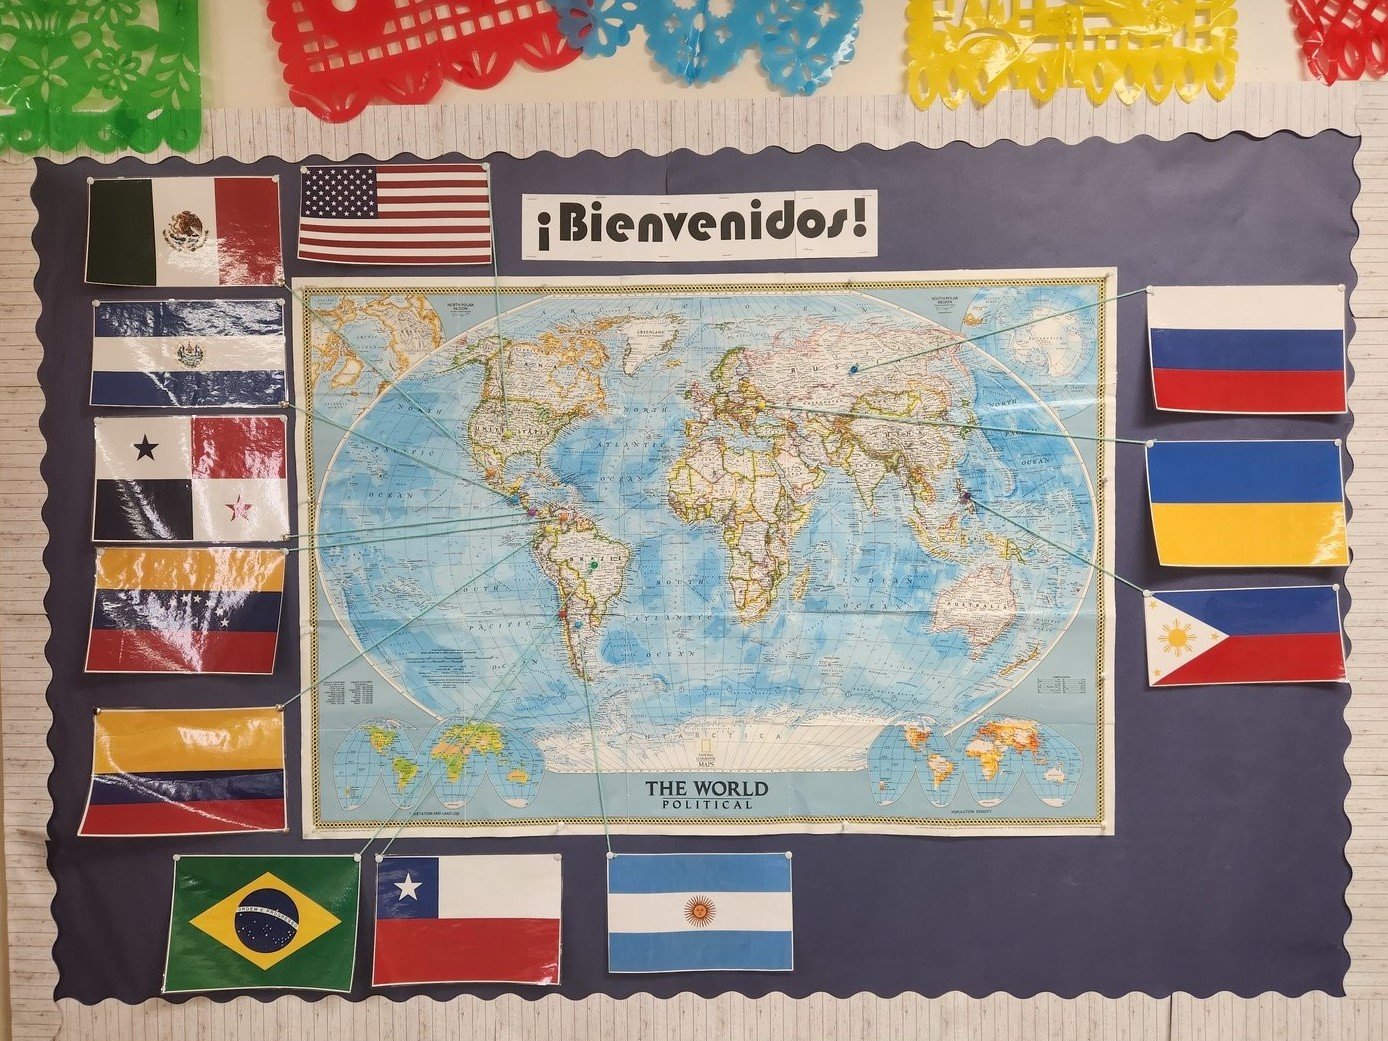 This map is used at Sacred Heart School in Sedalia during the year to help the students identify the flags and locations of all the countries represented by the student body.